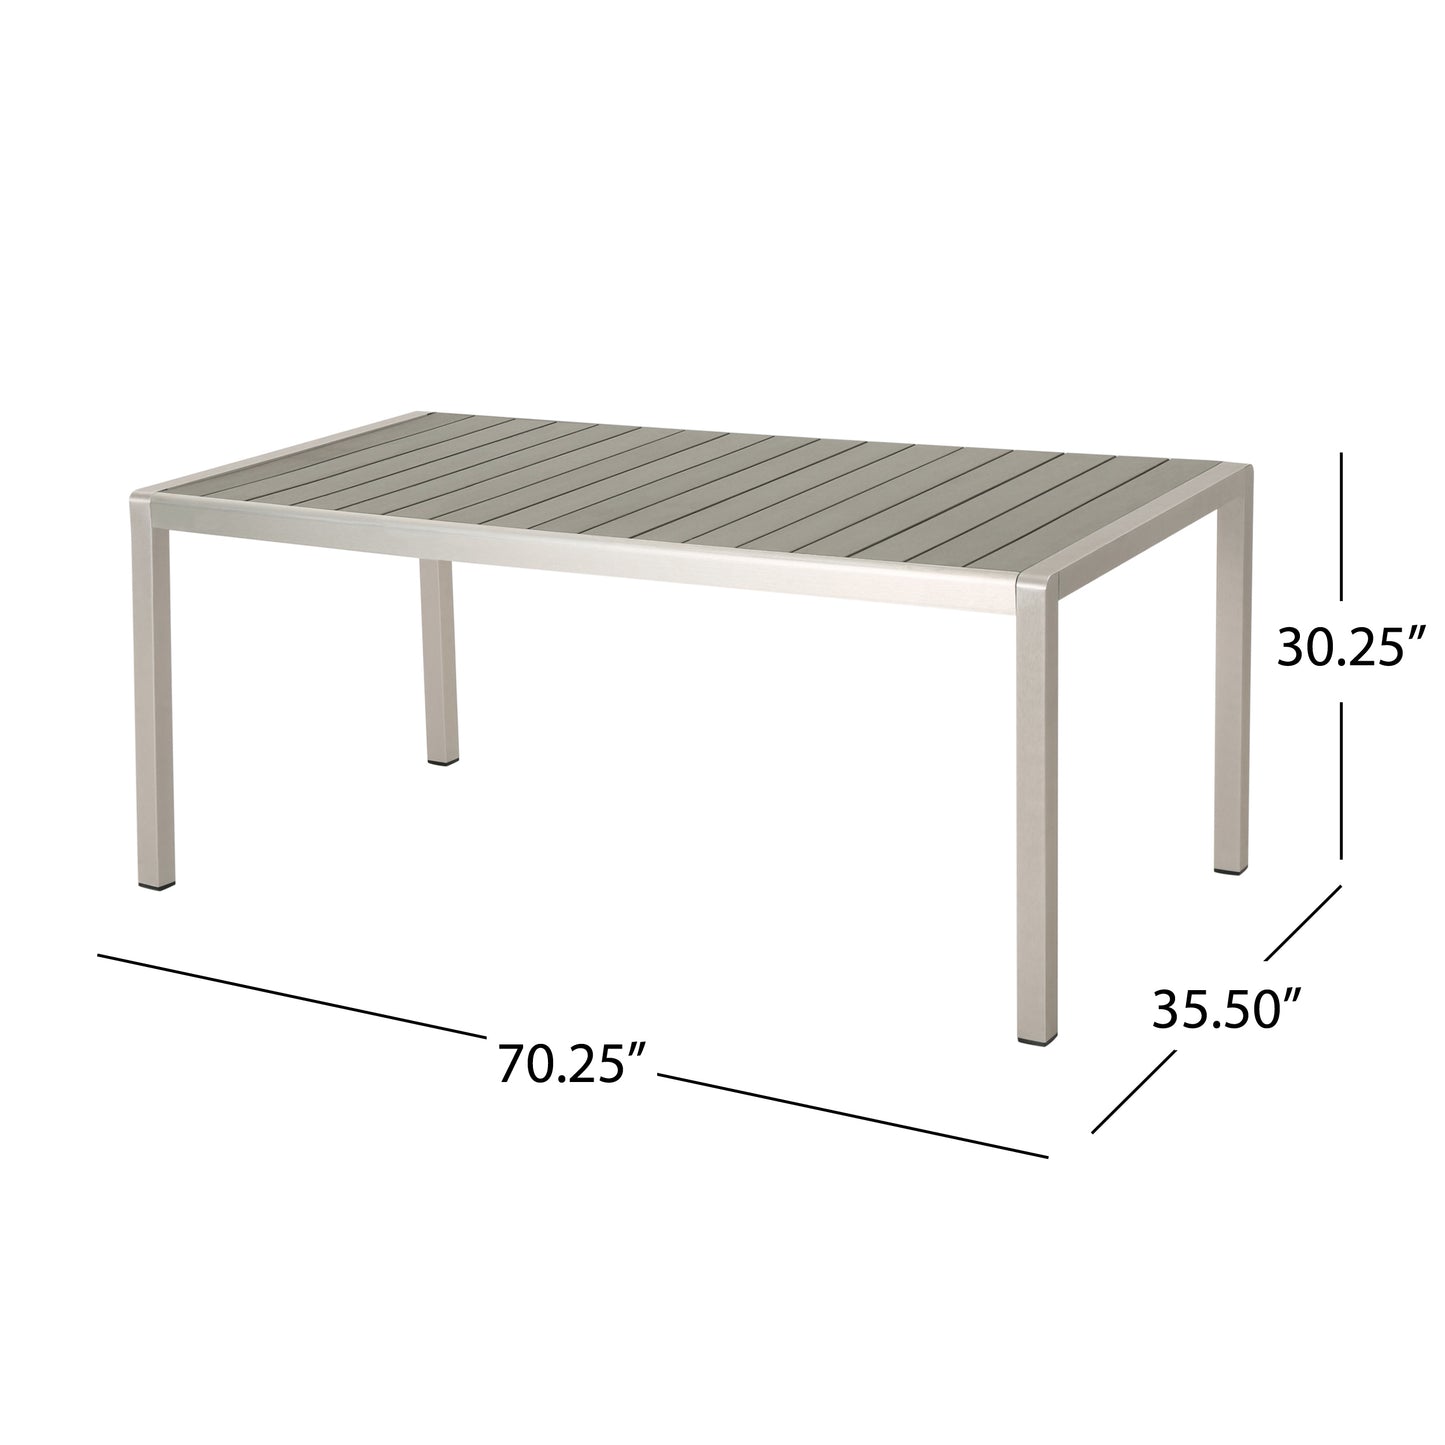 Cherie Outdoor Modern Aluminum 6 Seater Dining Set with Dining Bench